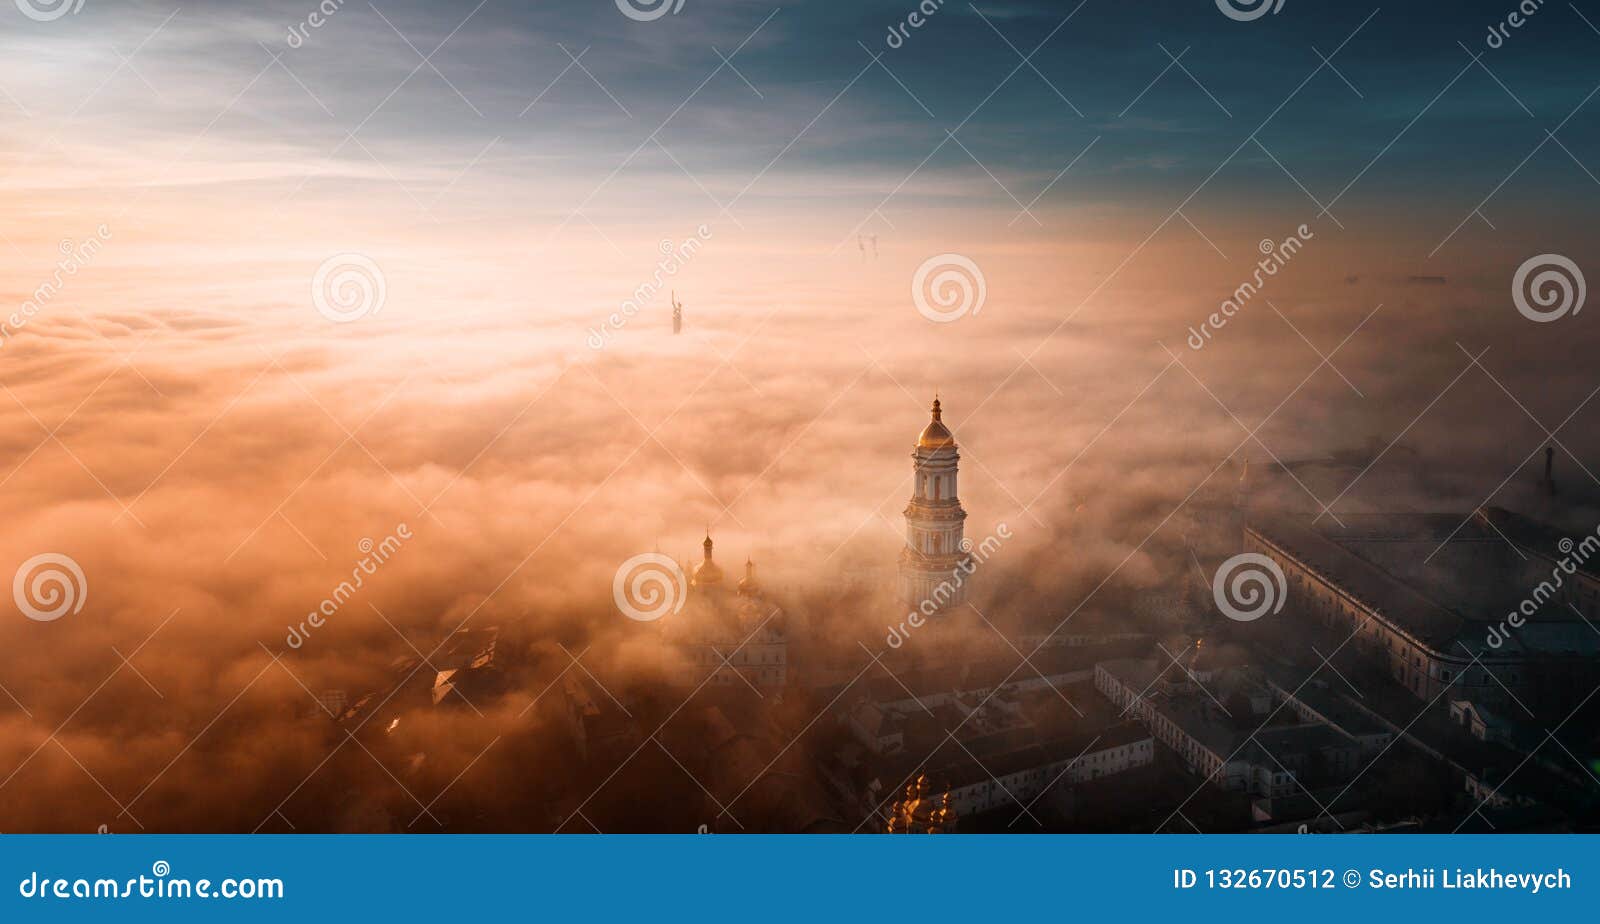 aerial view of kiev pechersk lavra at dawn and the city covered with thick fog in the background.